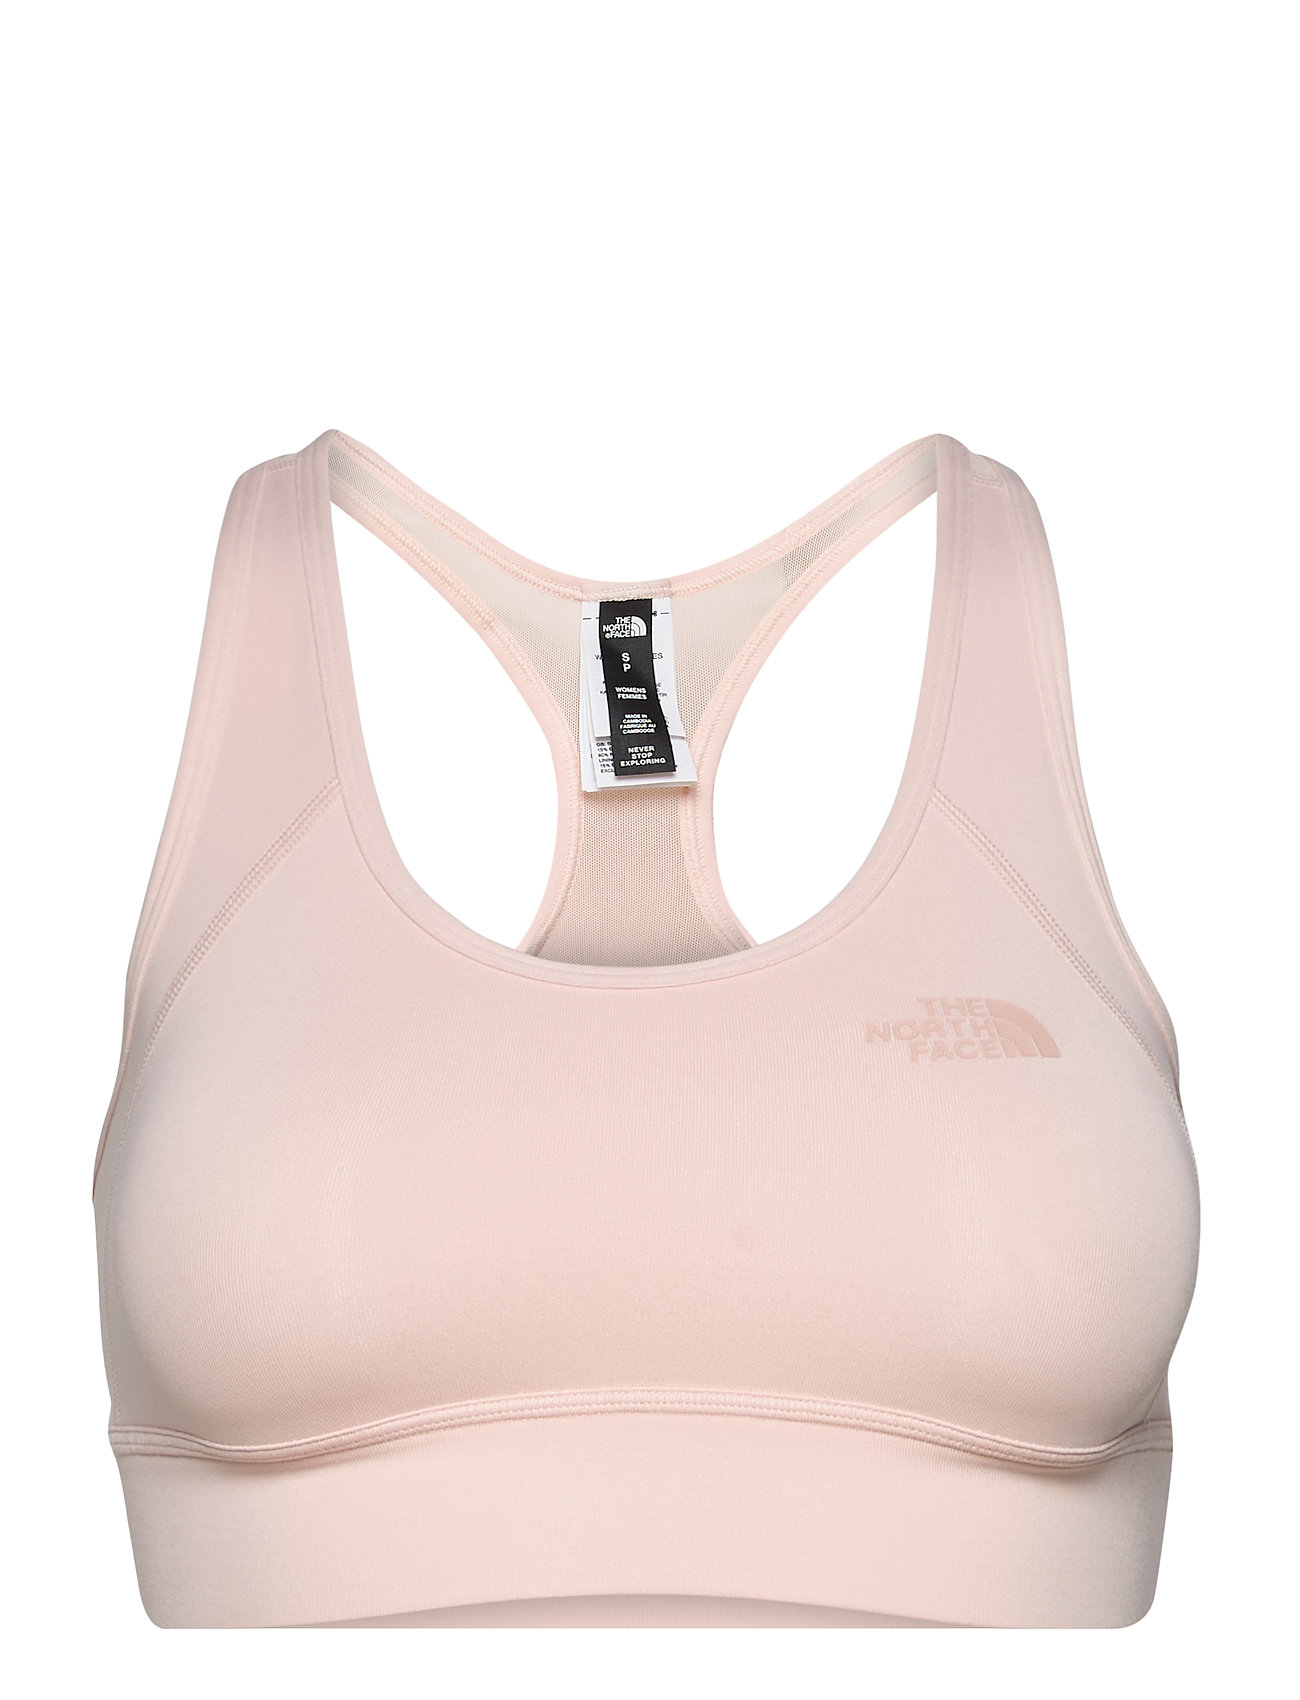 W Bounce Be G Bra Lingerie Bras & Tops Sports Bras - ALL Vaaleanpunainen The North Face